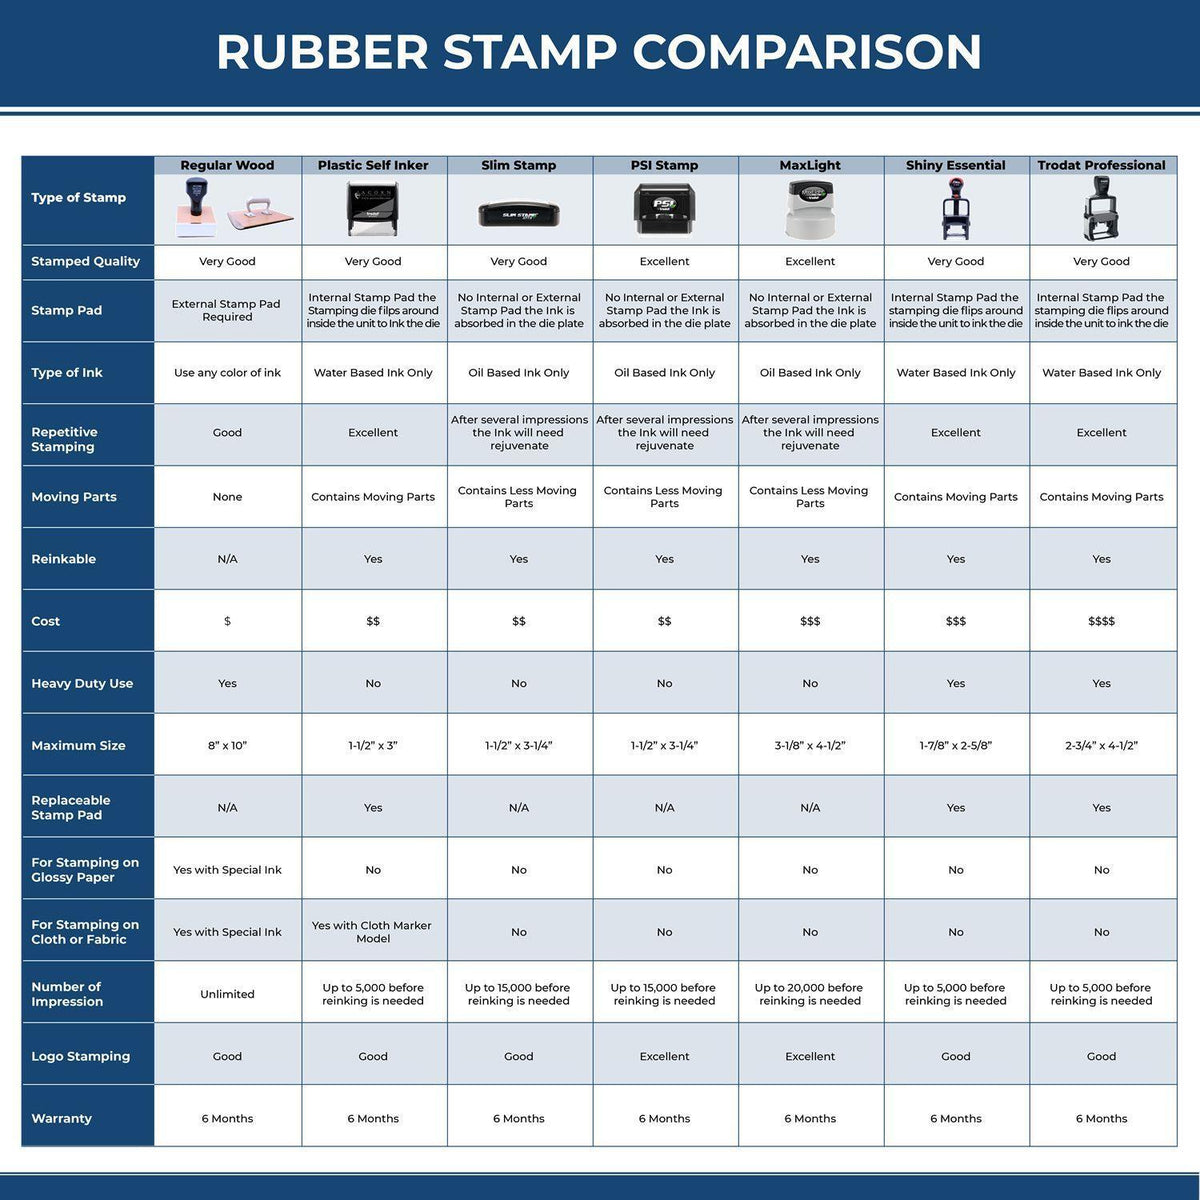 Large Advanced Placement Rubber Stamp 4634R Rubber Stamp Comparison